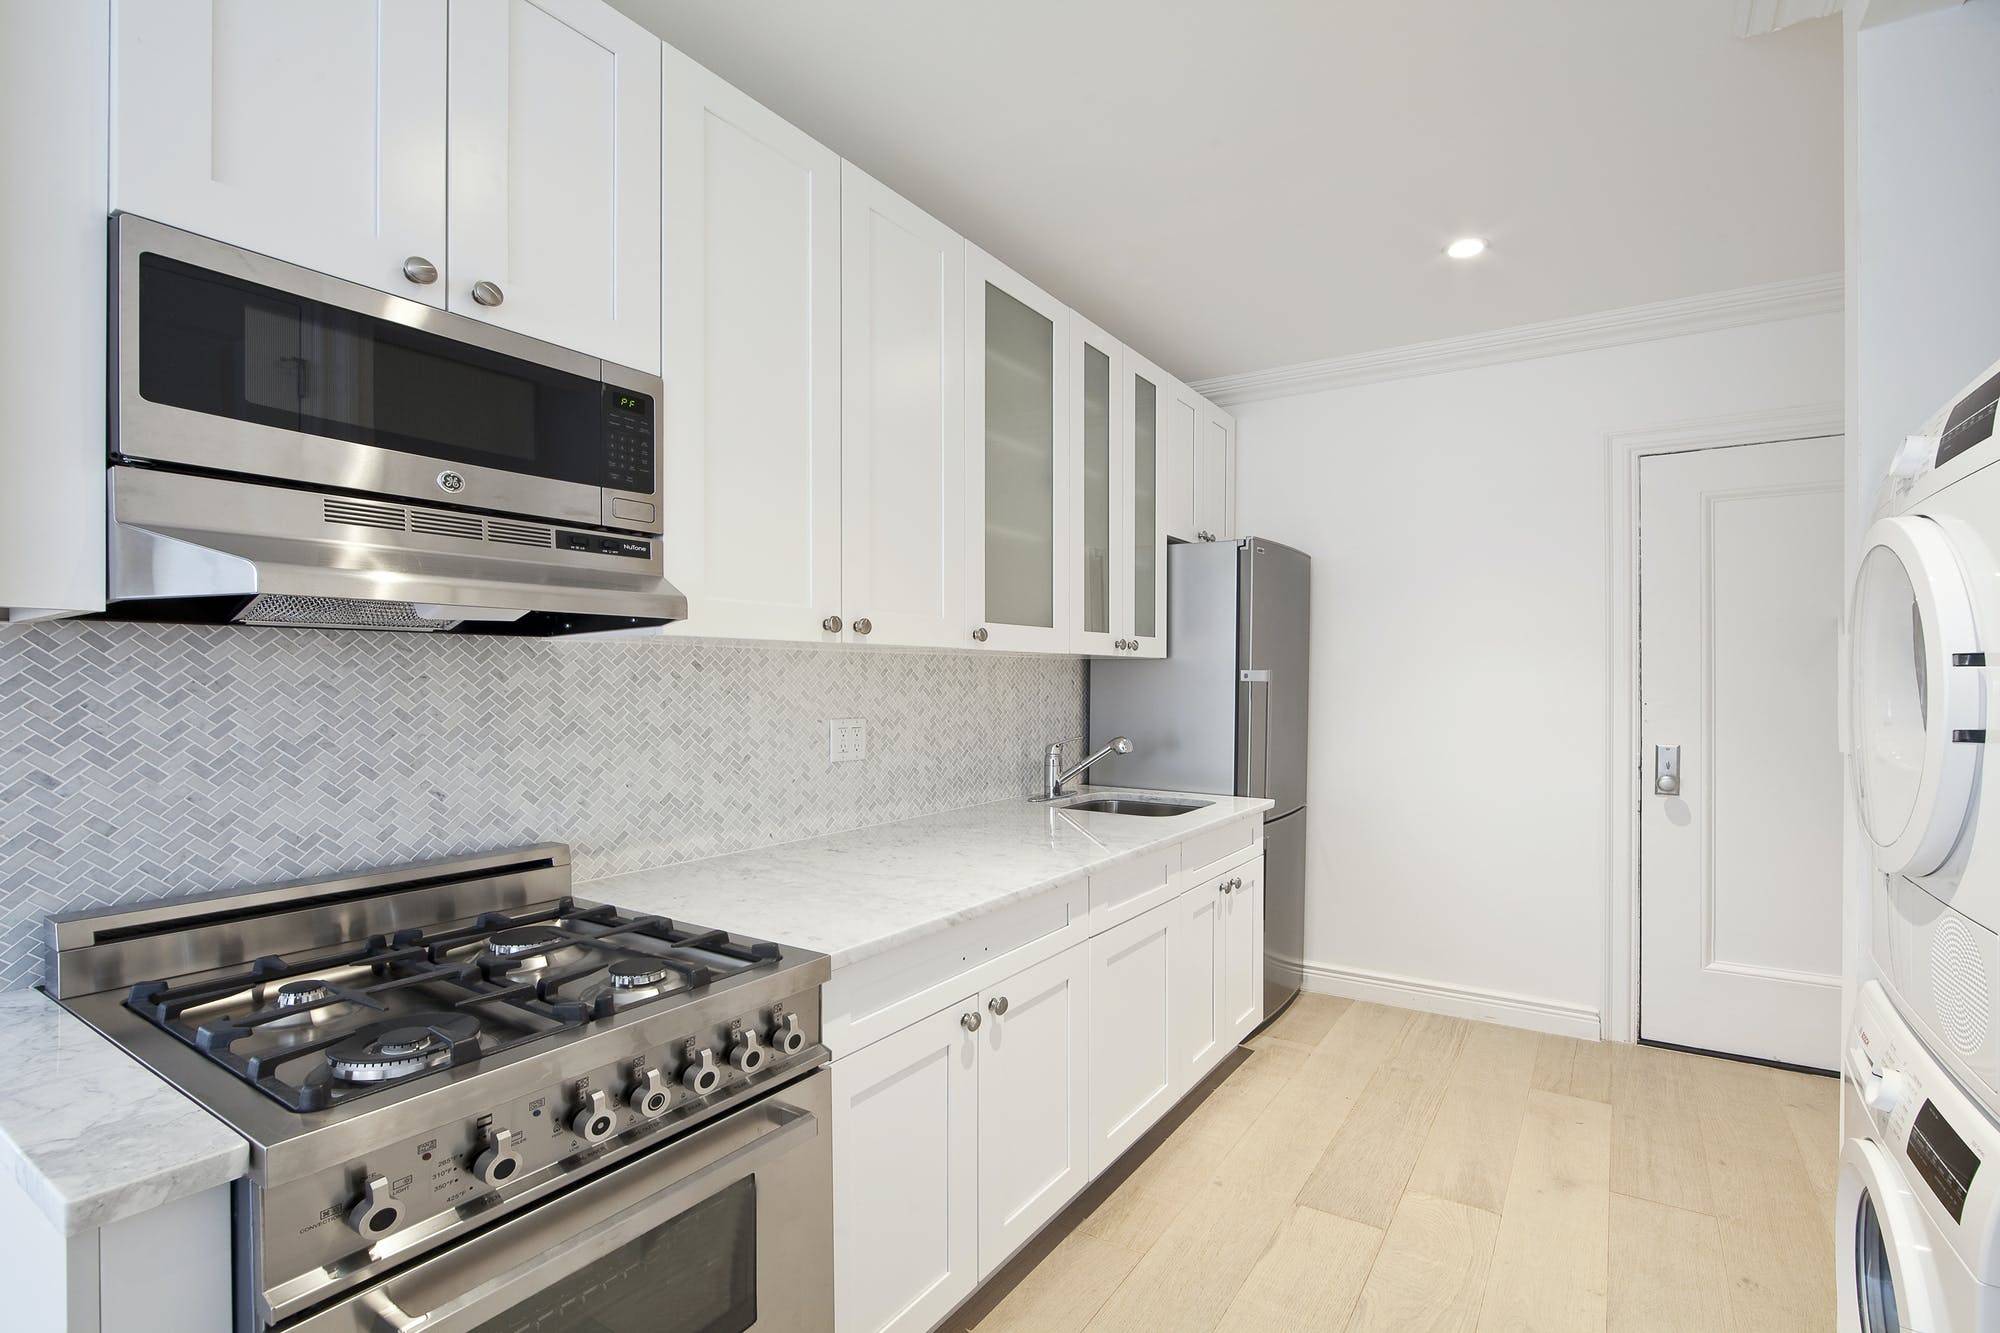 CLASSICALLY MODERN 2 Bed 1 Bath Photos are of a similar unit Past and Present Classically Contemporary Transcending Time 115 Henrys newly designed apartments give a nod to both the ...